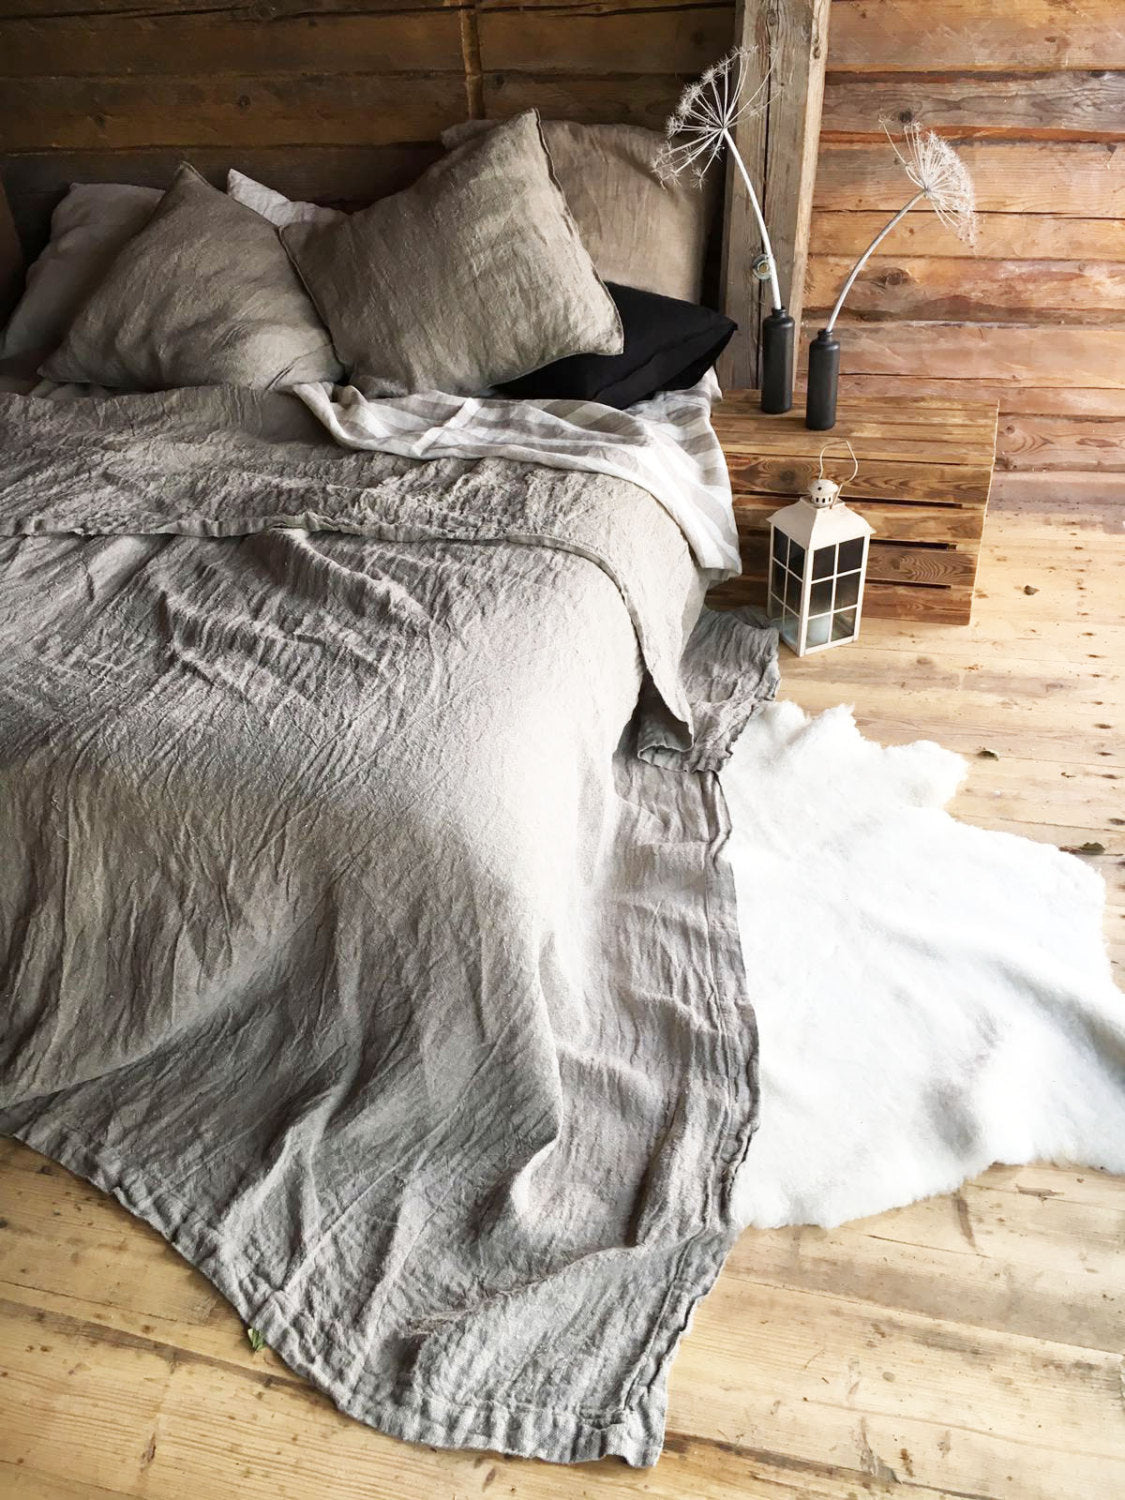 Decorative Pillowcases from Natural Rustic Linen, Countryhouse Shams -  Linenbee